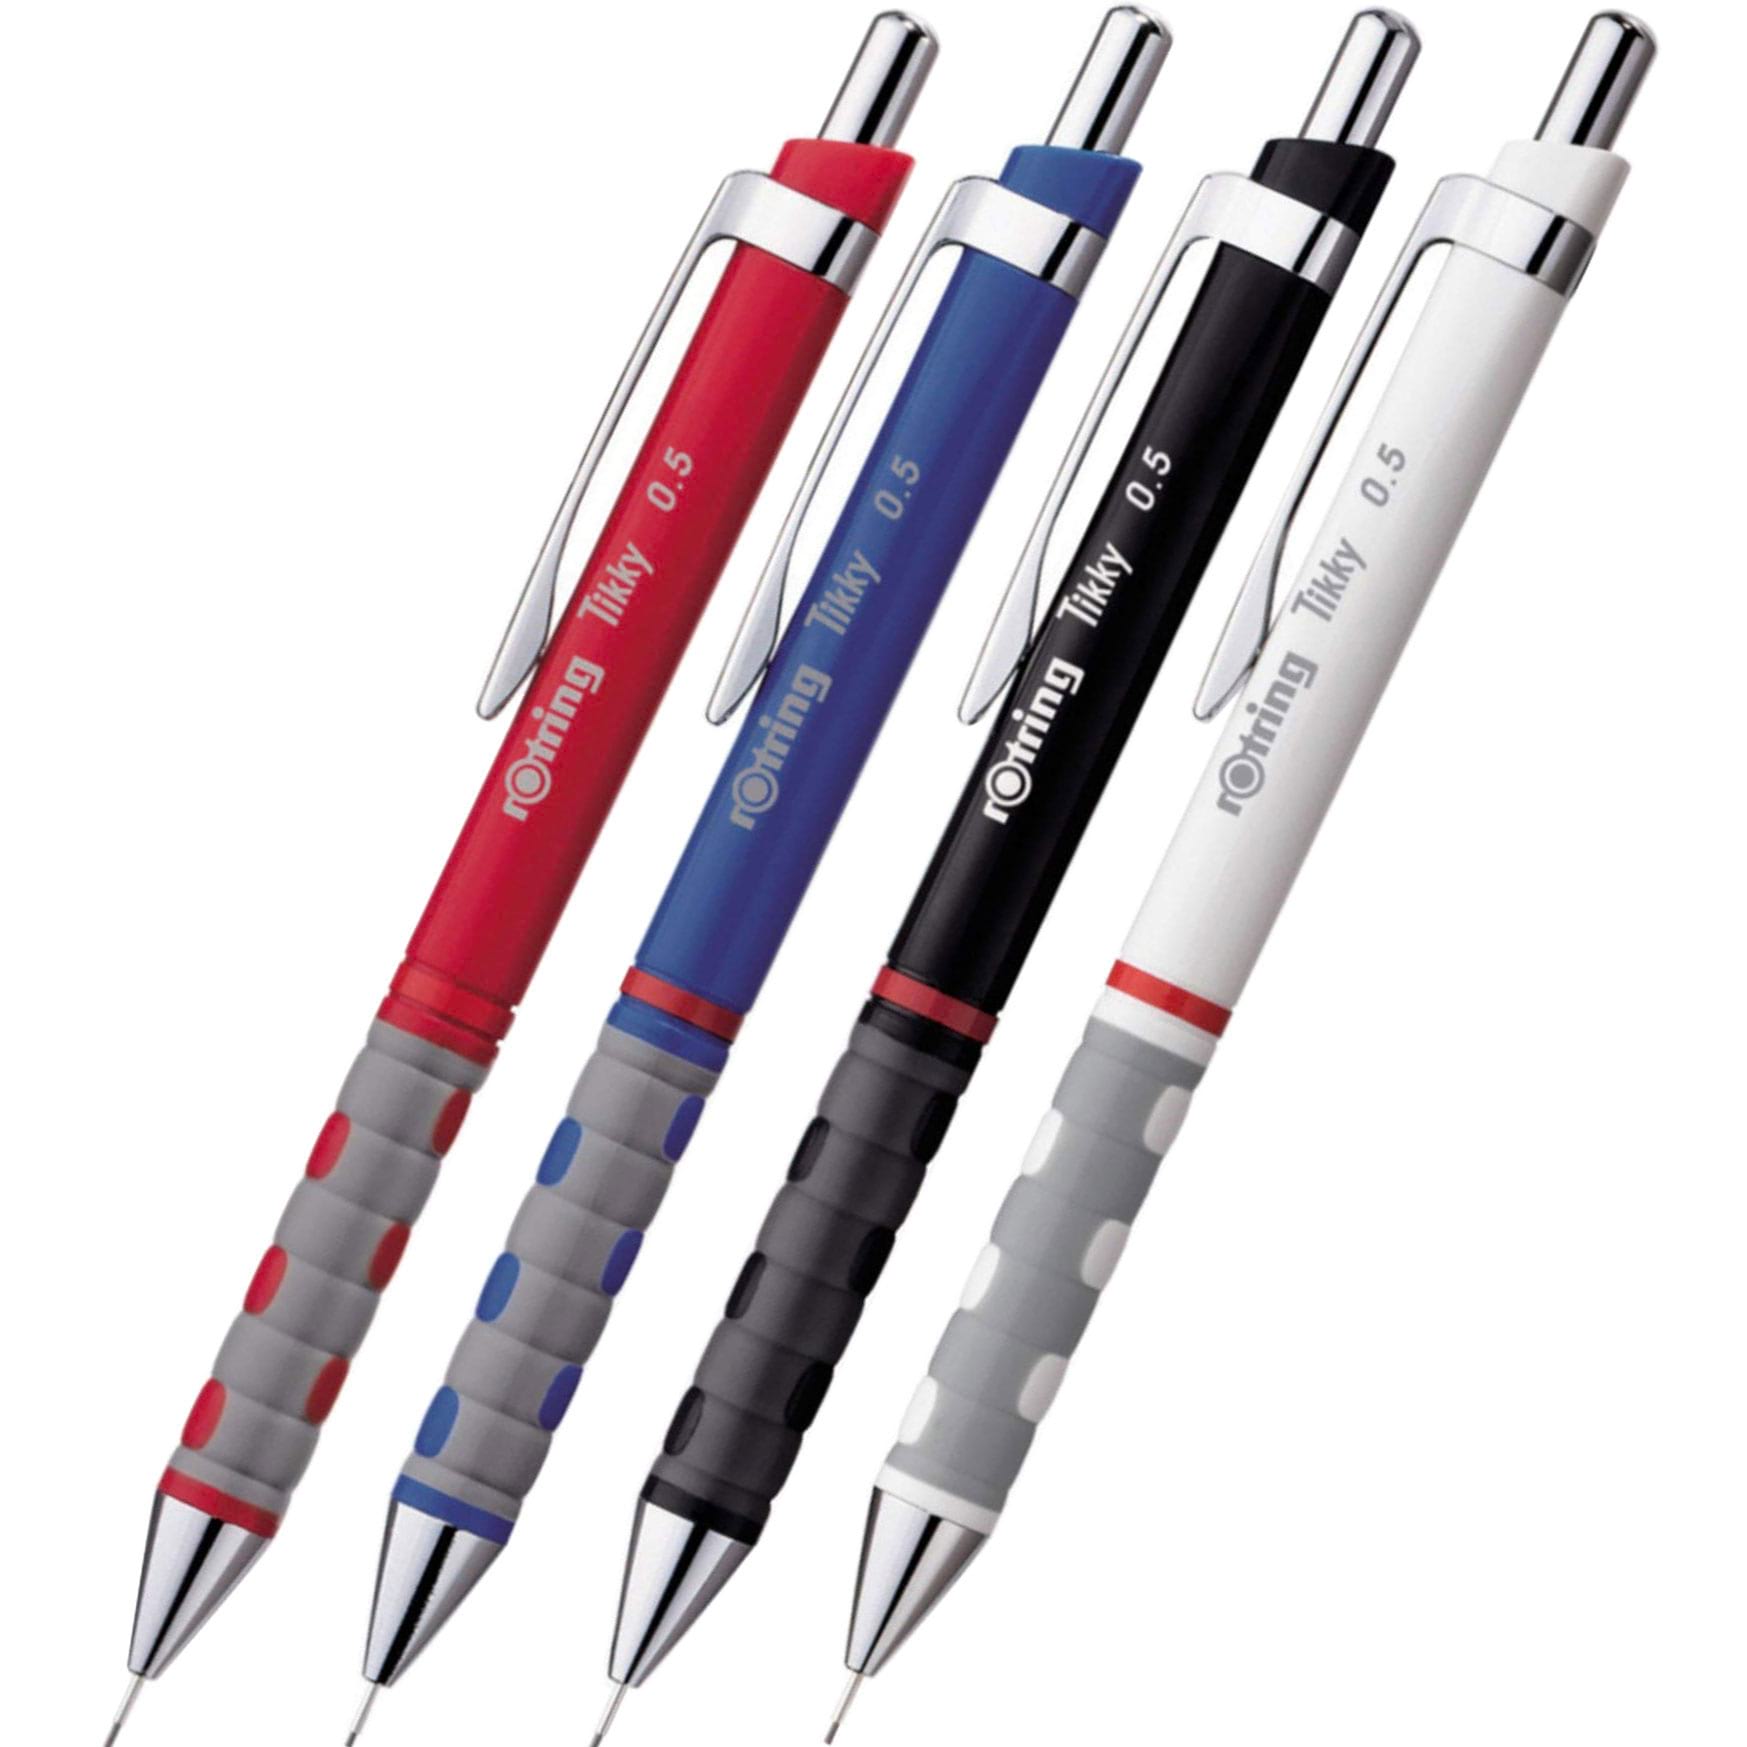 Rotring Tikky Mechanical Pencil - 0.5 mm - White